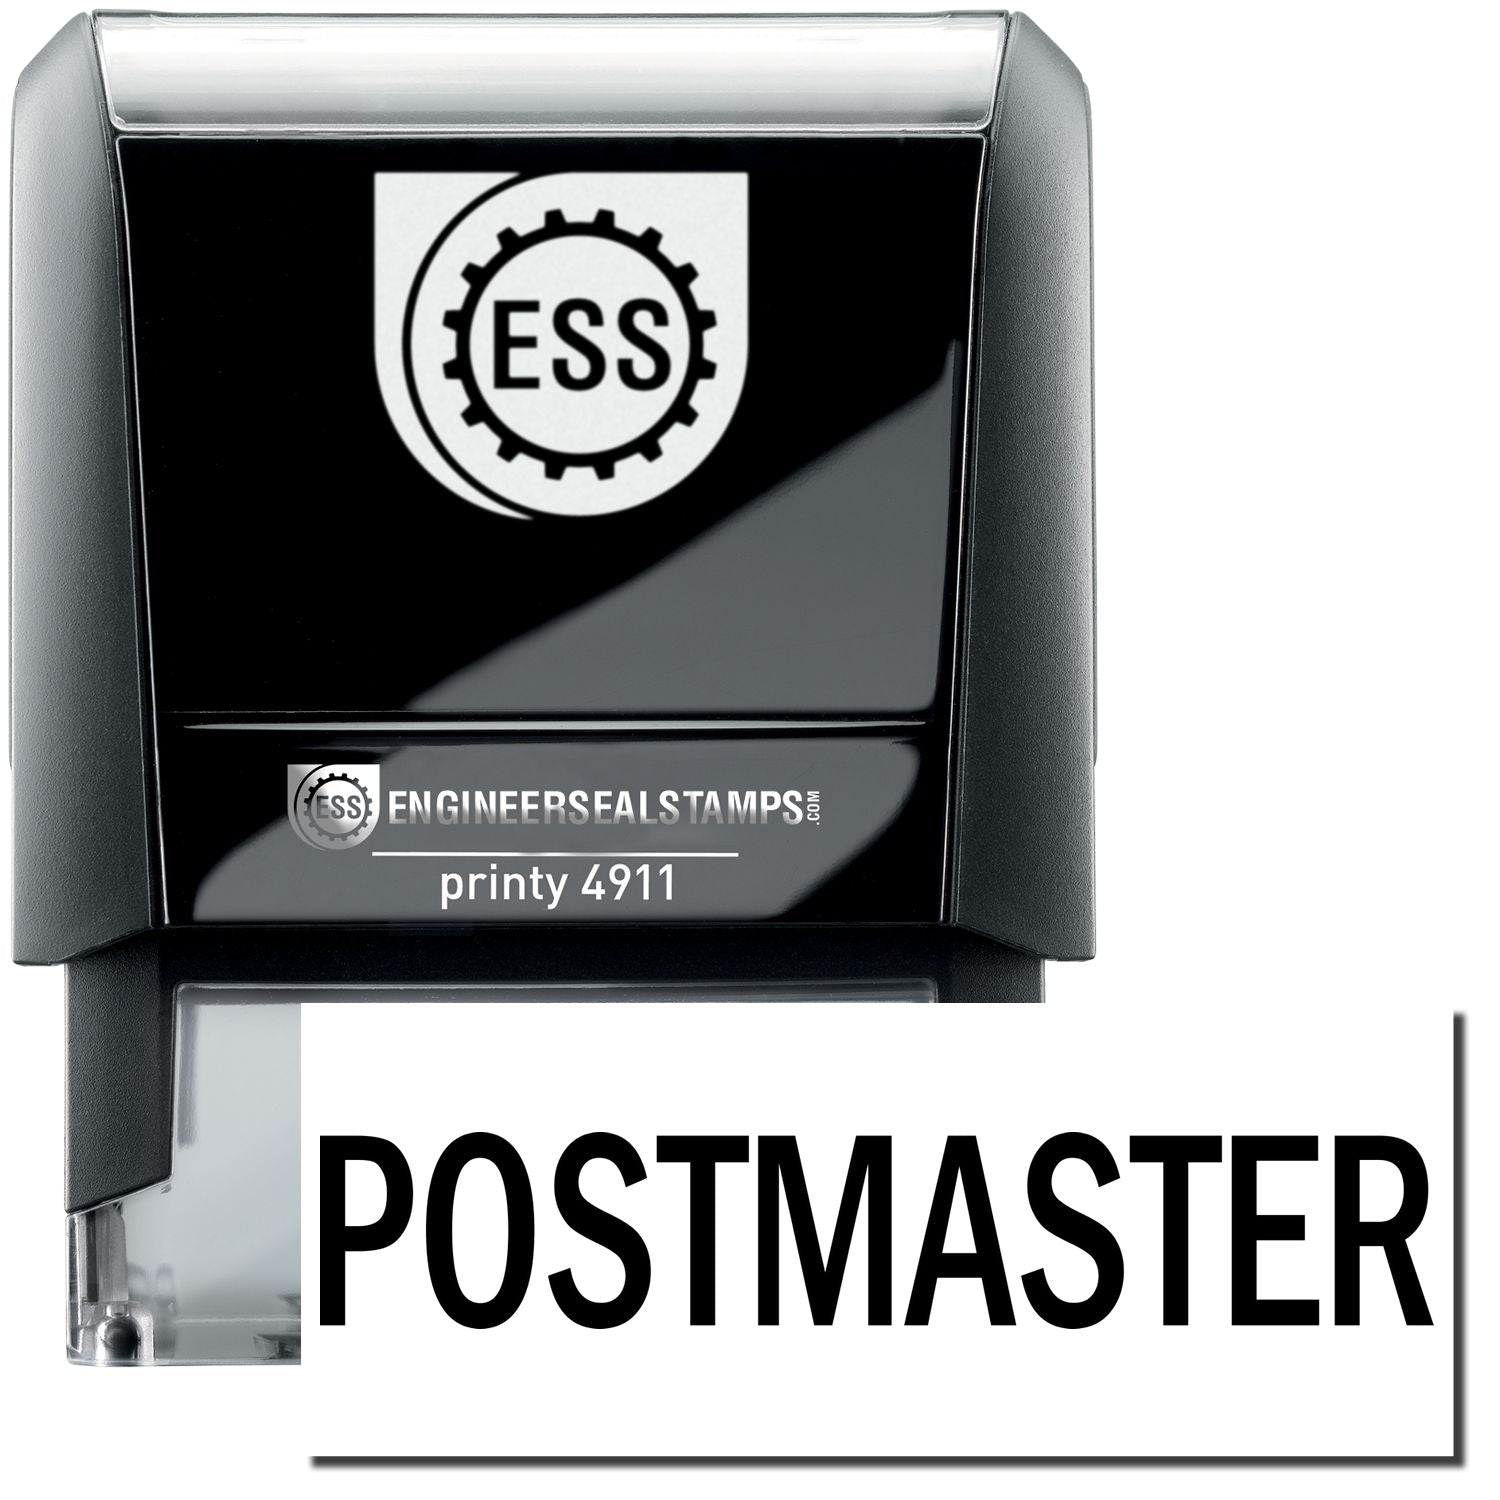 A self-inking stamp with a stamped image showing how the text "POSTMASTER" is displayed after stamping.